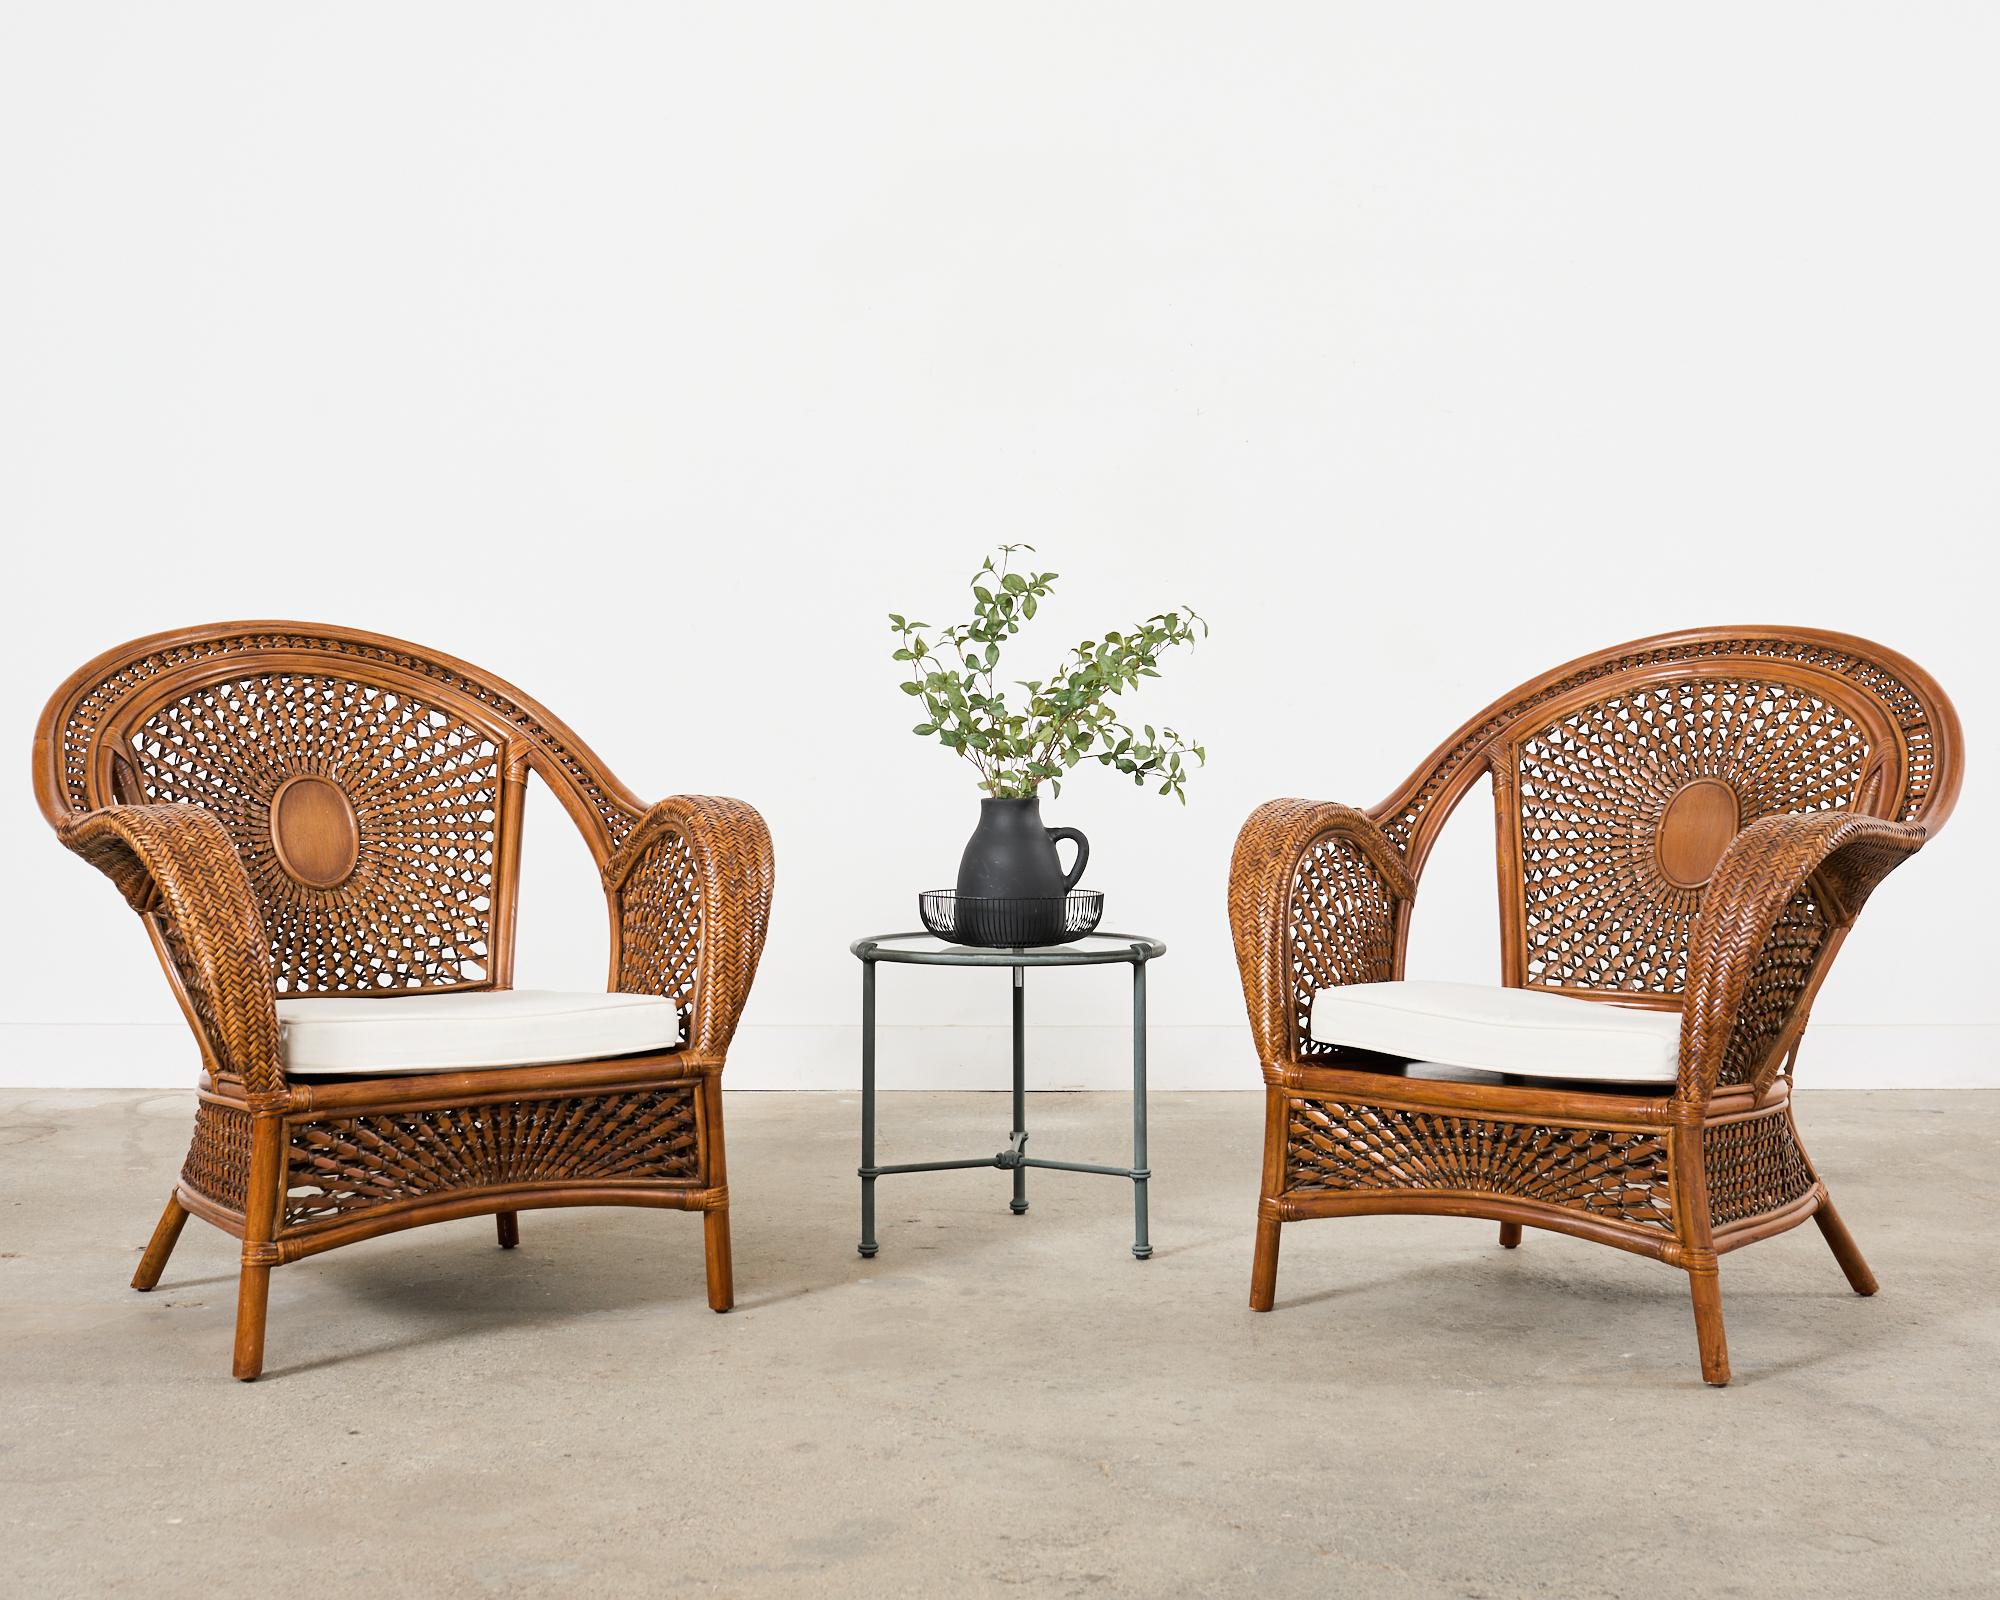 Stylish pair of Bohemian rattan and wicker lounge chairs or armchairs having large peacock or fan backs. The chairs feature gracefully curved rattan frames embellished with decorative woven wicker designs of sunburst patterns. The backs are centered